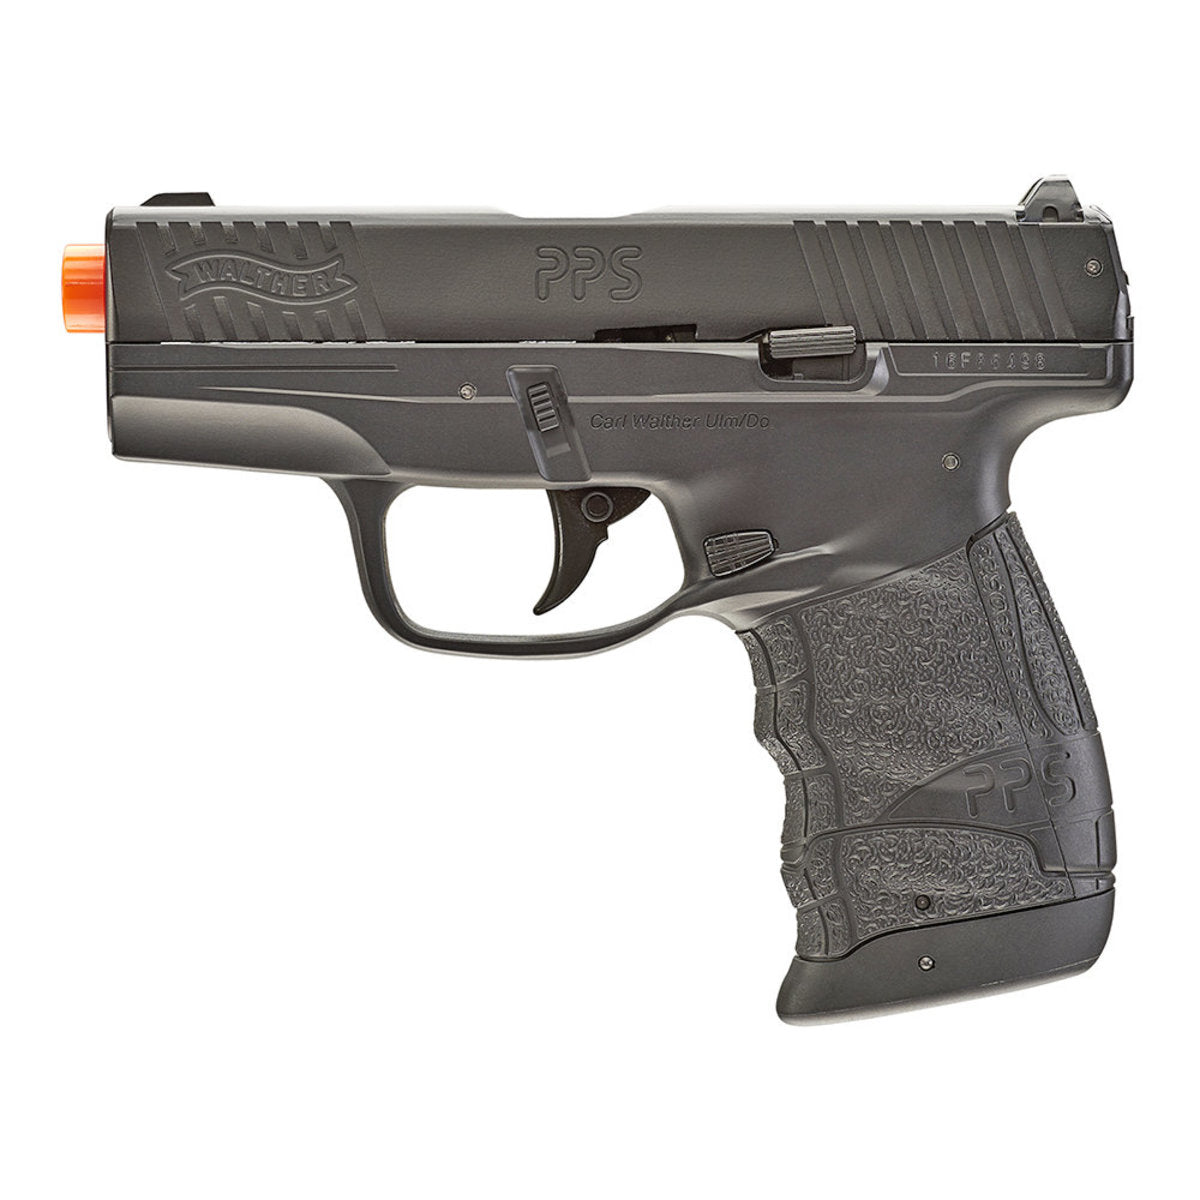 Umarex Walther Pps M2 Co2 Half Blowback Airsoft Pistol